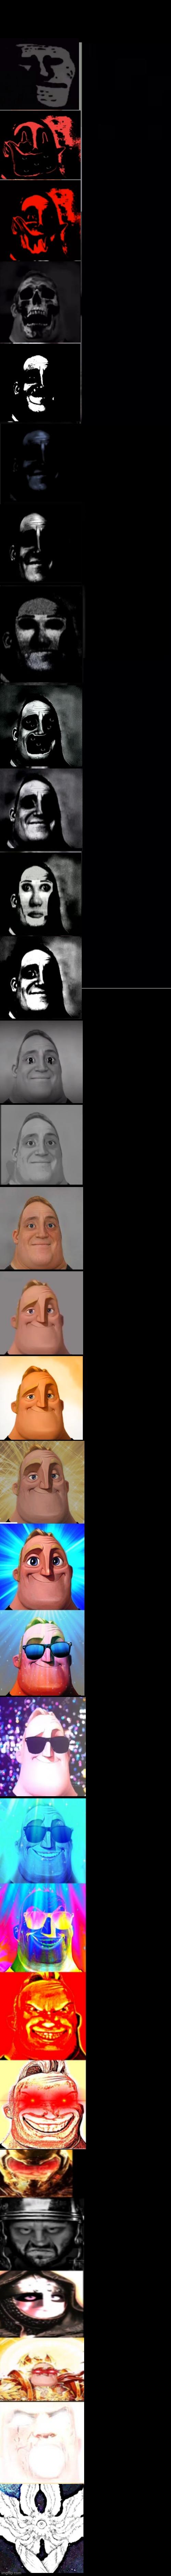 Mr. Incredible becoming uncanny to canny ultra extended | image tagged in memes,mr incredible becoming uncanny to canny | made w/ Imgflip meme maker